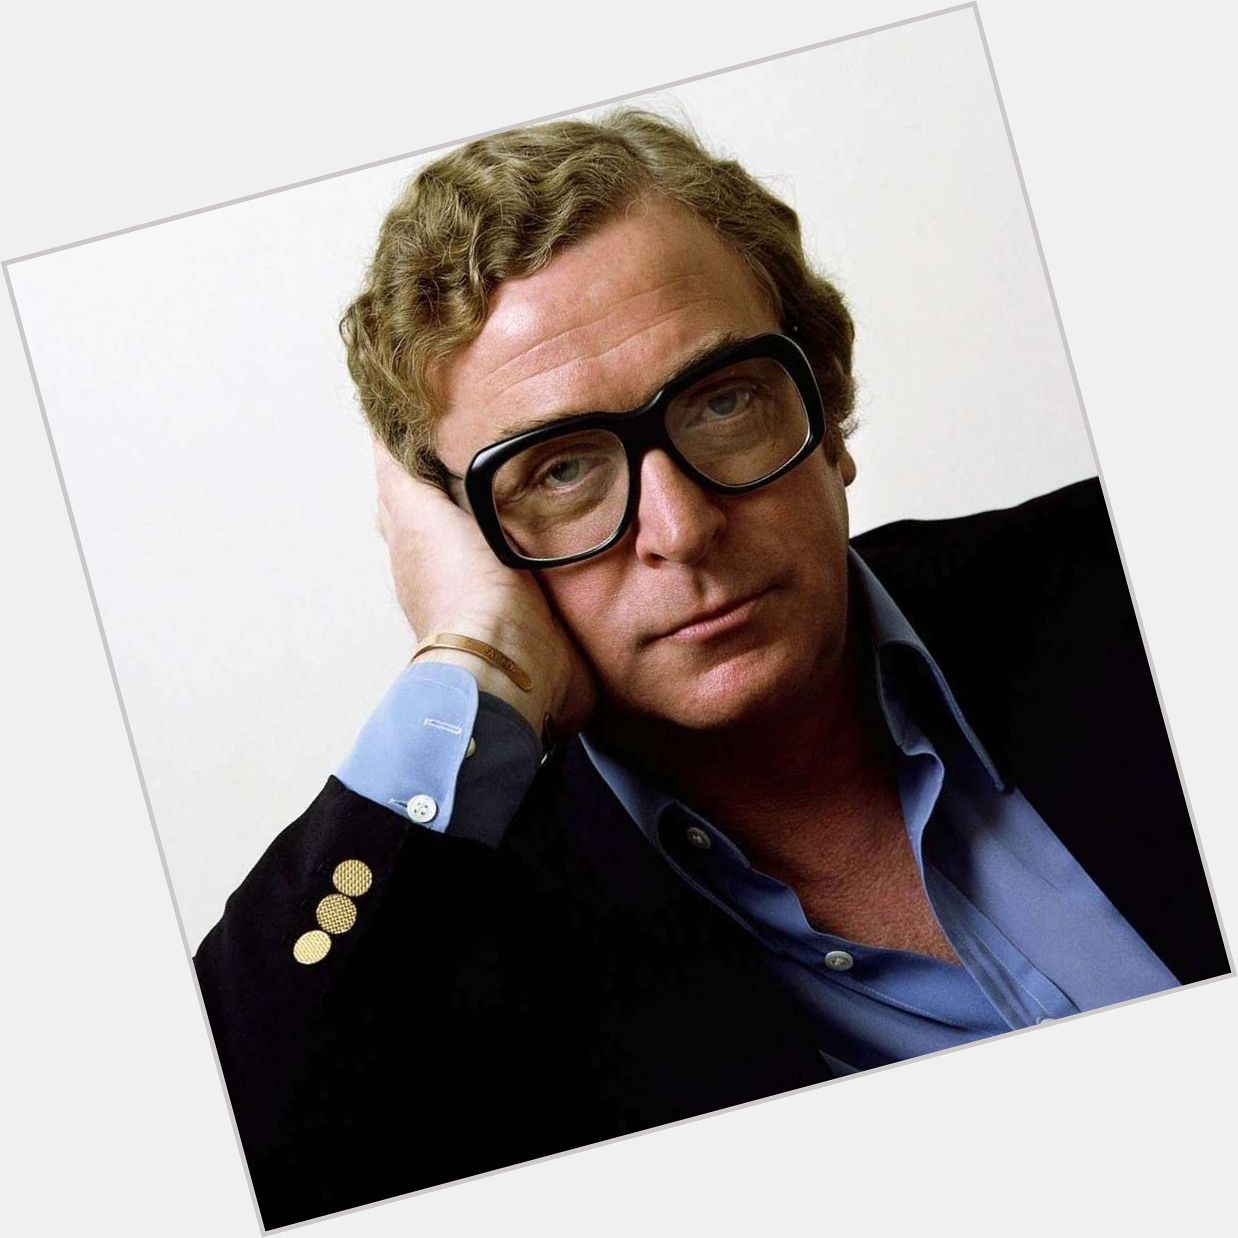 Happy 86th Birthday wishes go out to Maurice Joseph Micklewhite a.k.a. Michael Caine today! 